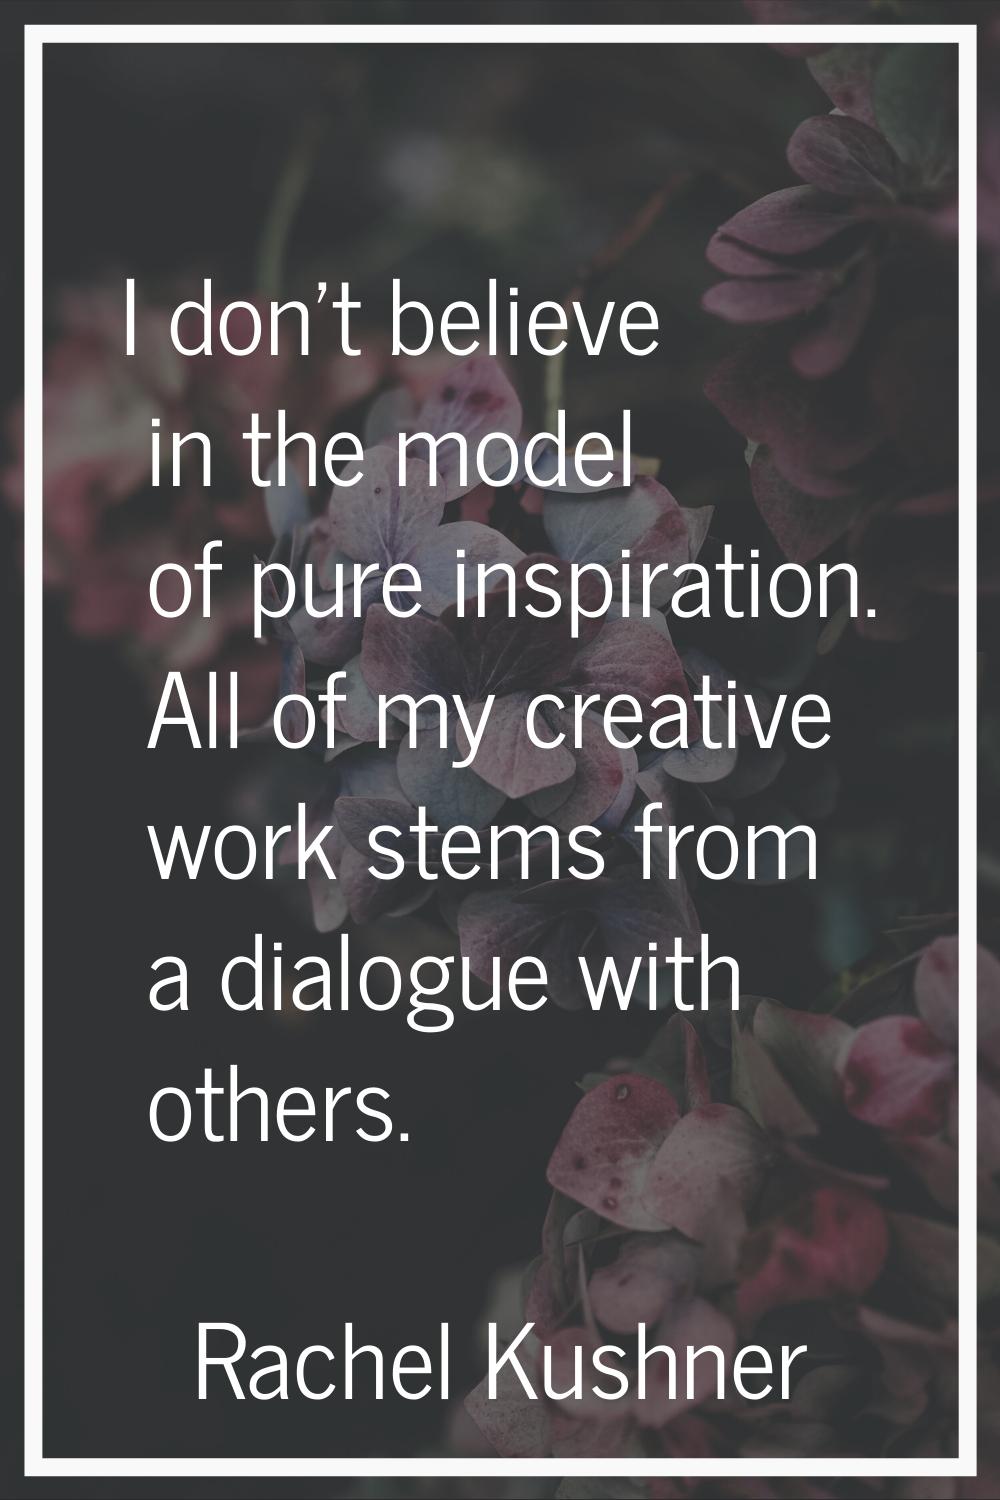 I don't believe in the model of pure inspiration. All of my creative work stems from a dialogue wit